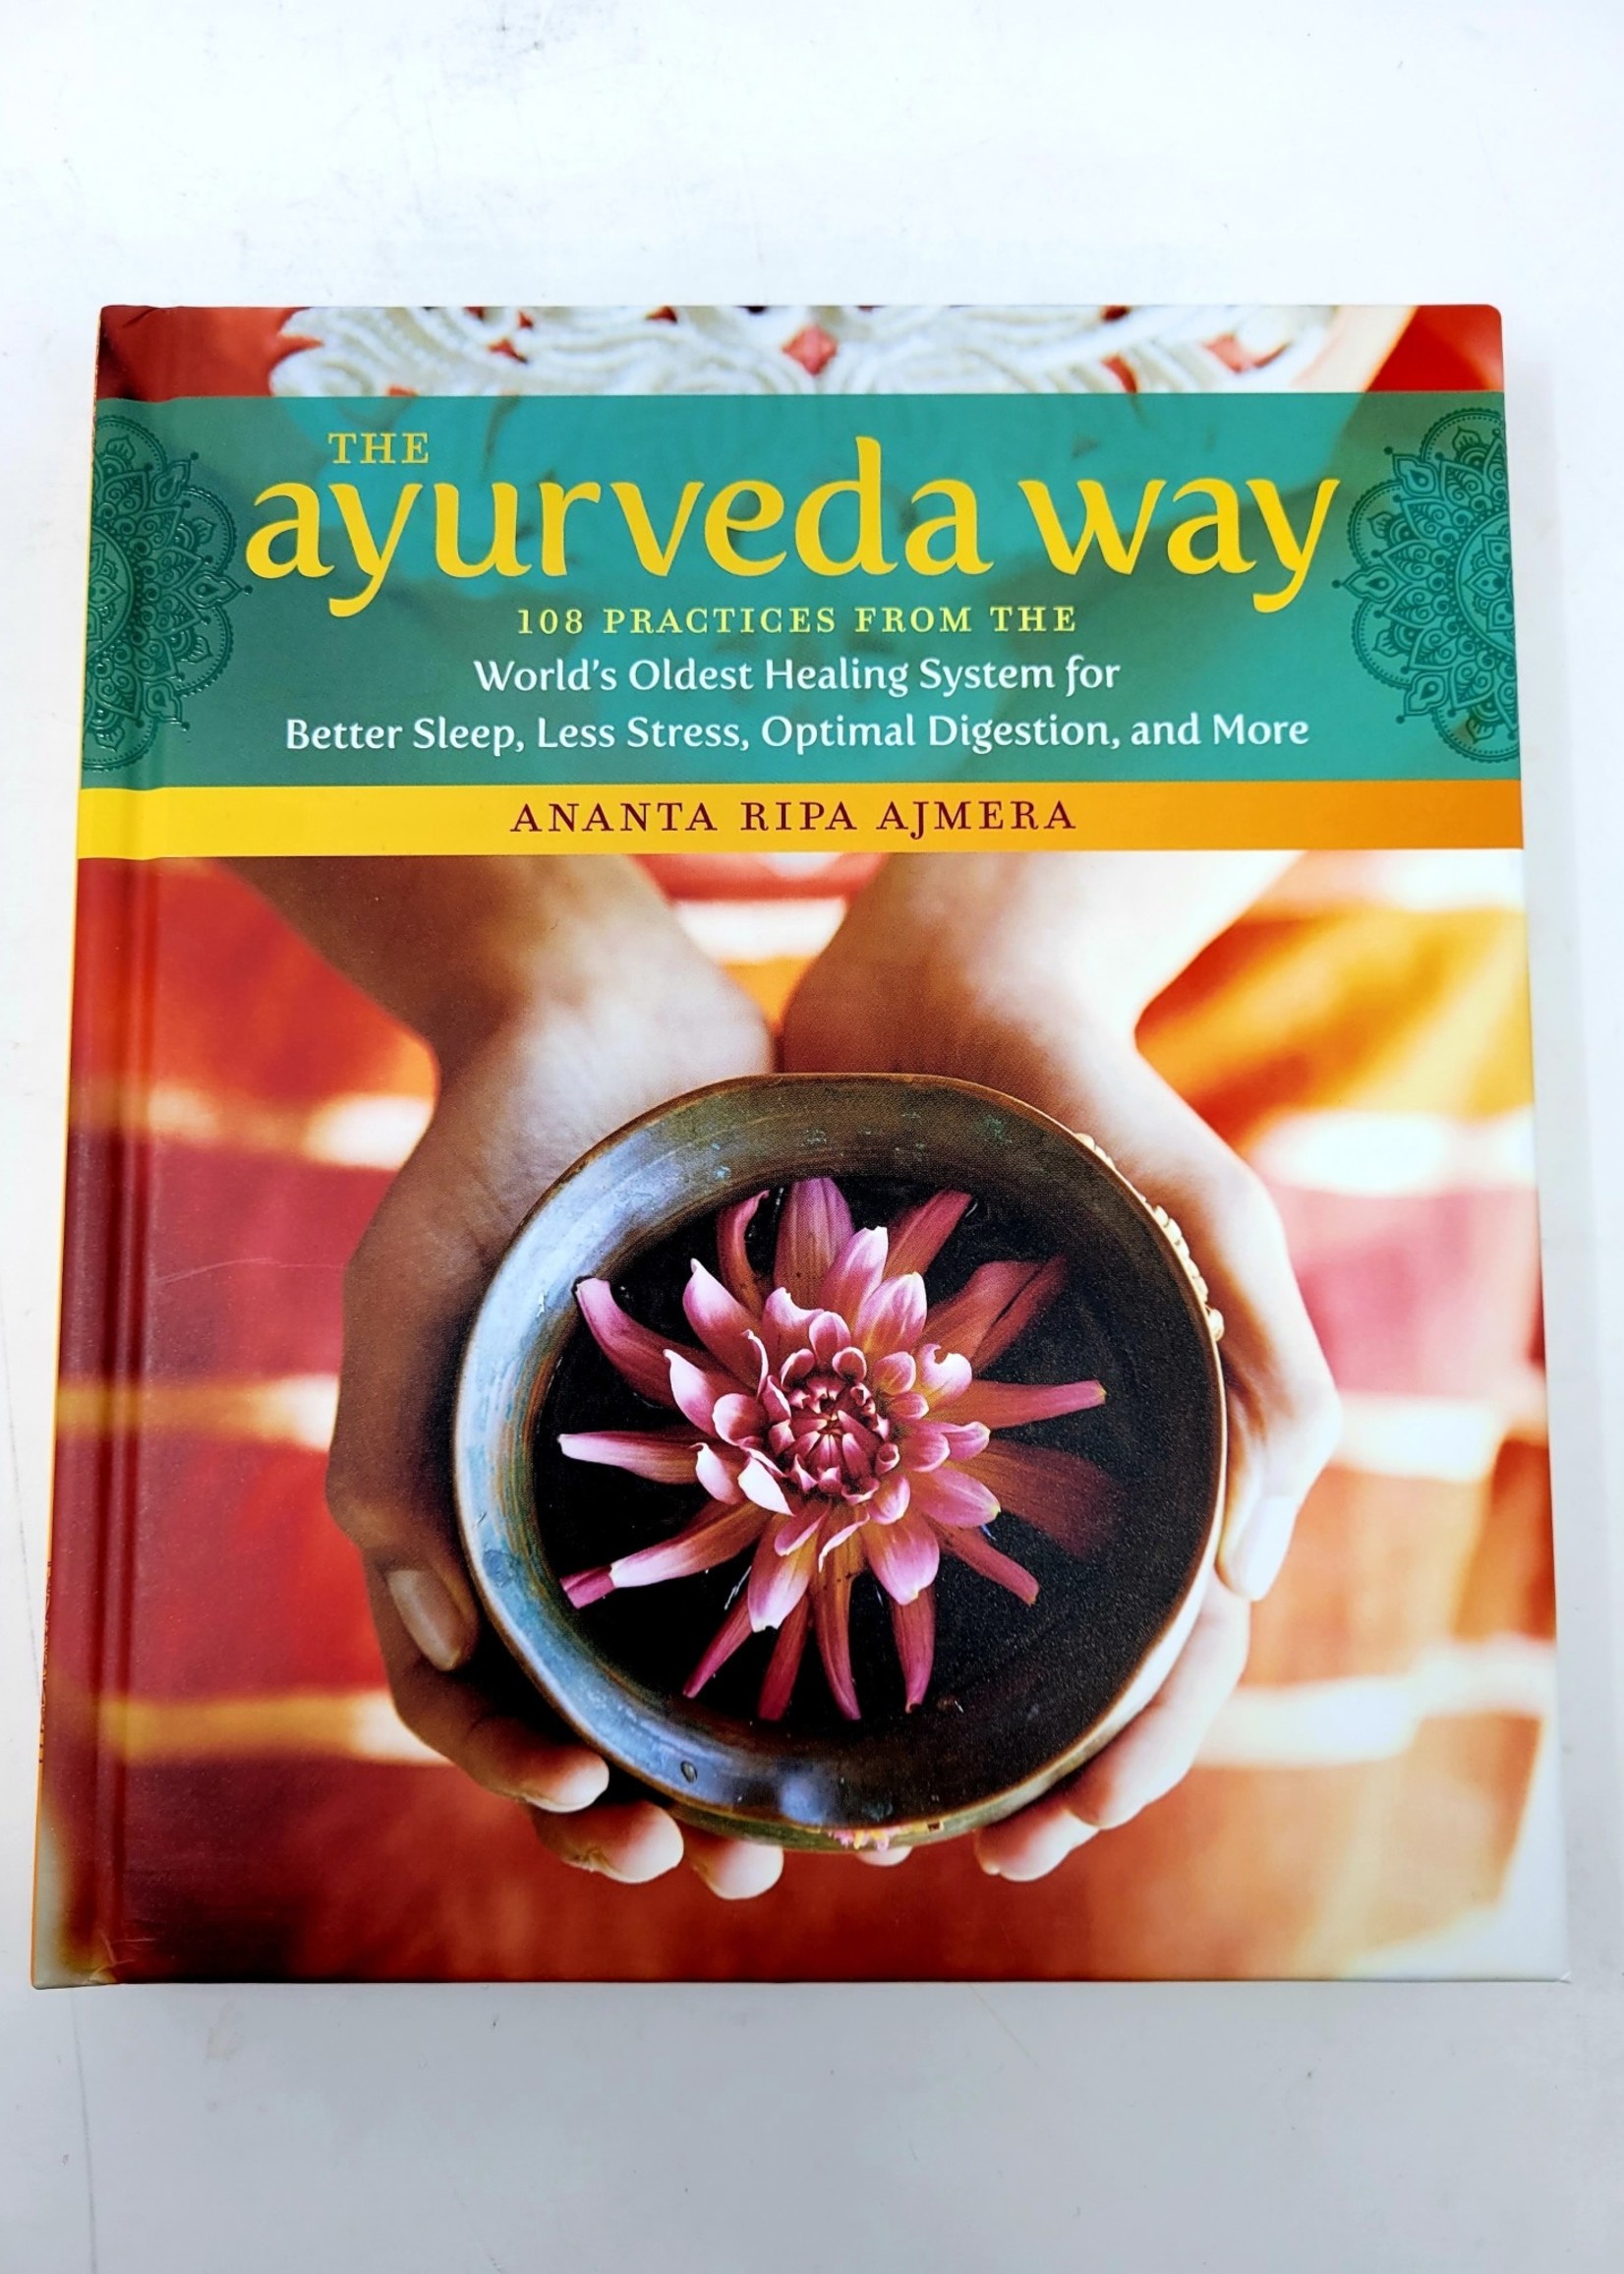 The Ayurveda Way 108 Practices from the World’s Oldest Healing System for Better Sleep, Less Stress, Optimal Digestion, and More - by Ananta Ripa Ajmera